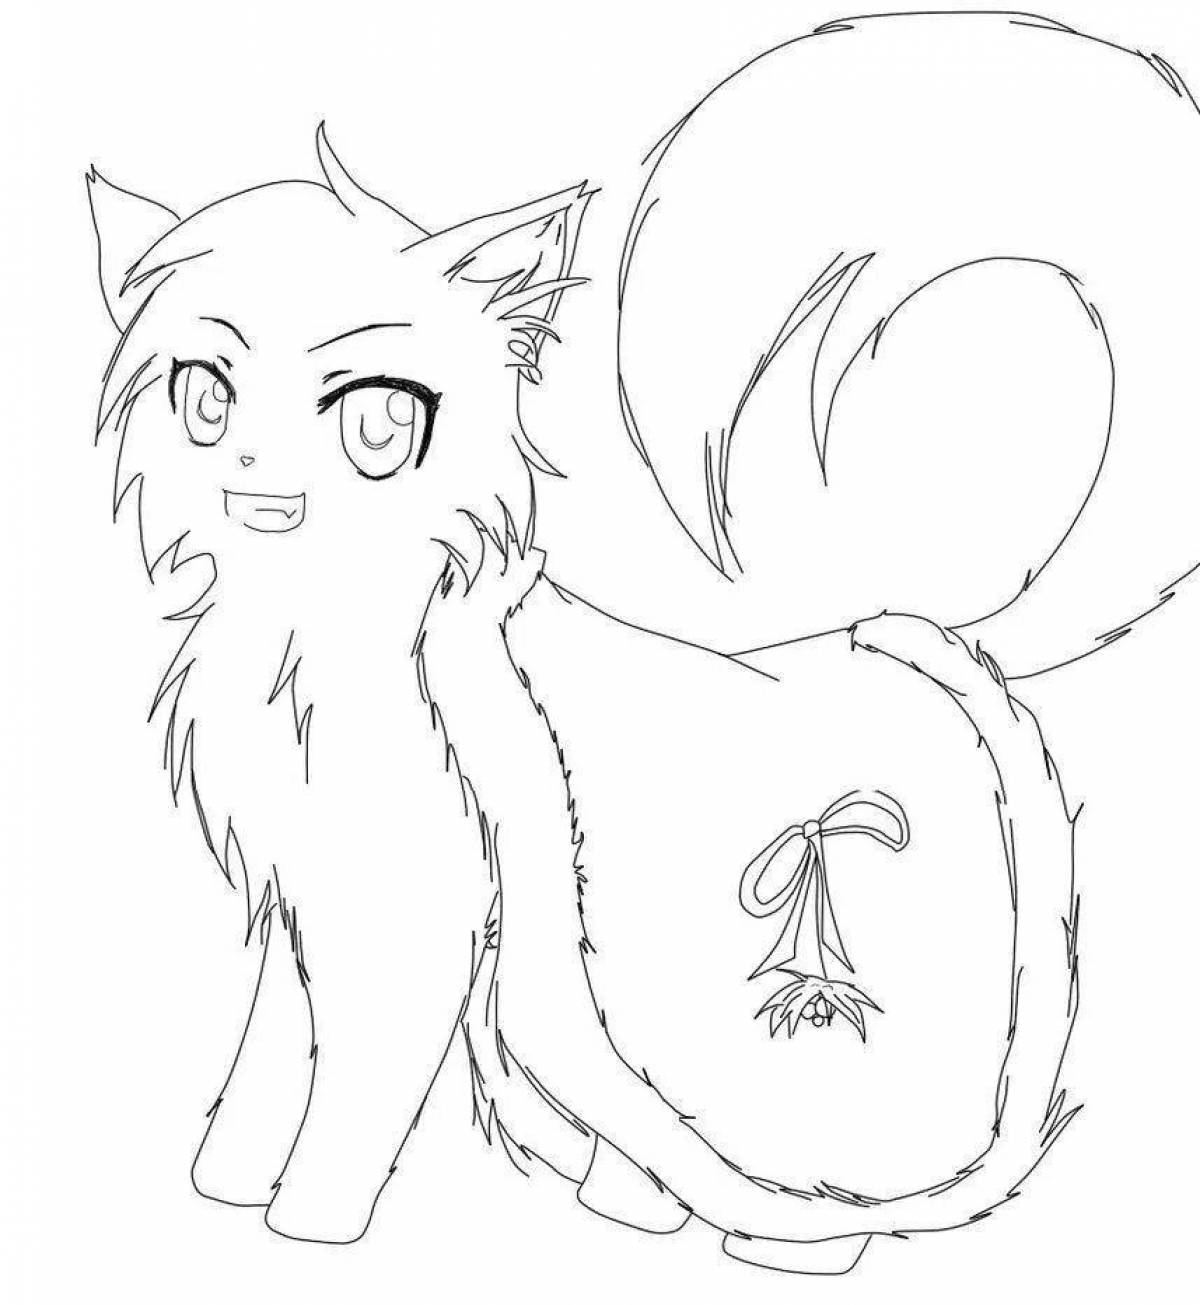 Sparkling anime cat coloring page